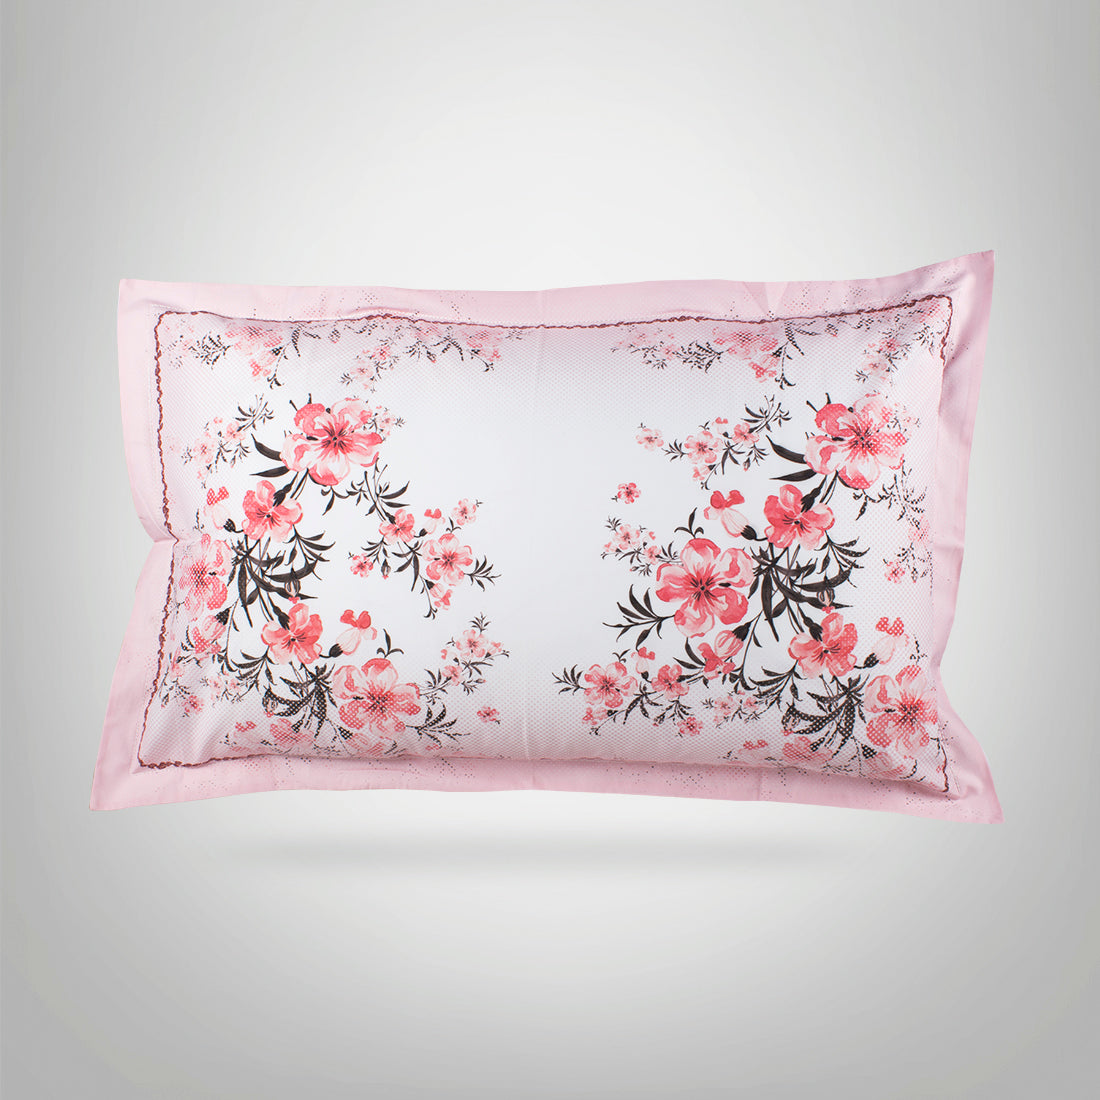 V2G Just Flower Printed Pillow Covers - Pair